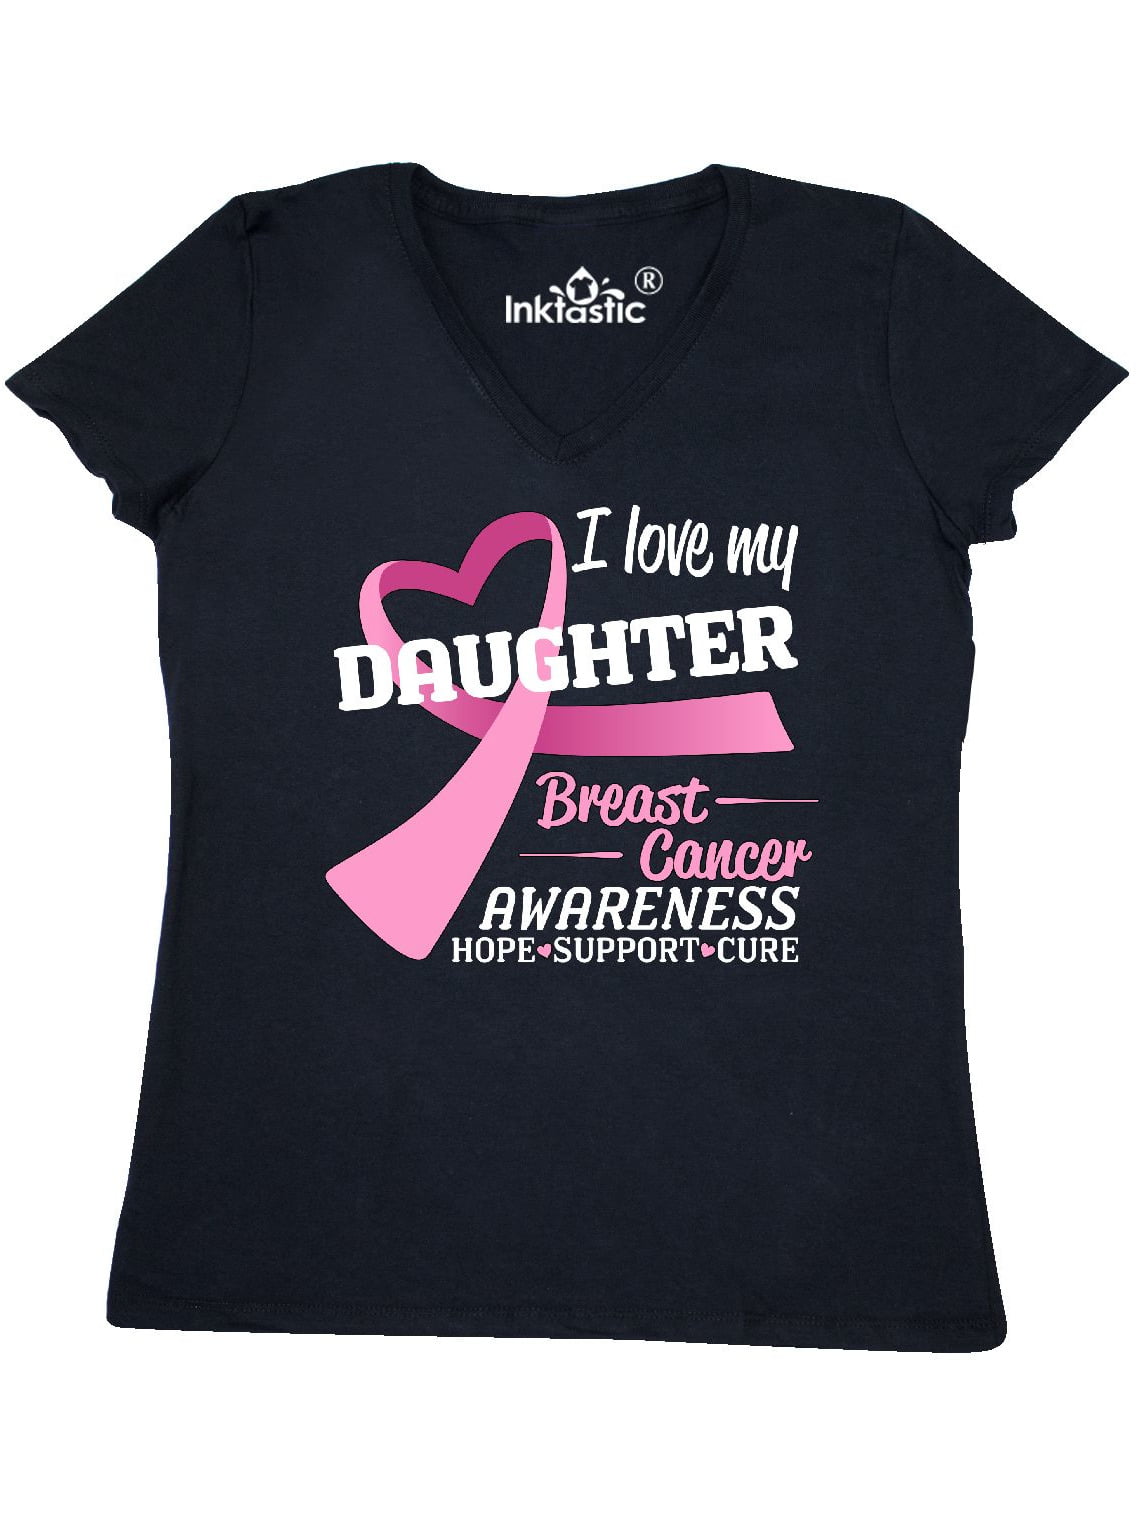 A Cure Begins with The First Step Breast Cancer Awareness Rhinestone T-Shirts 